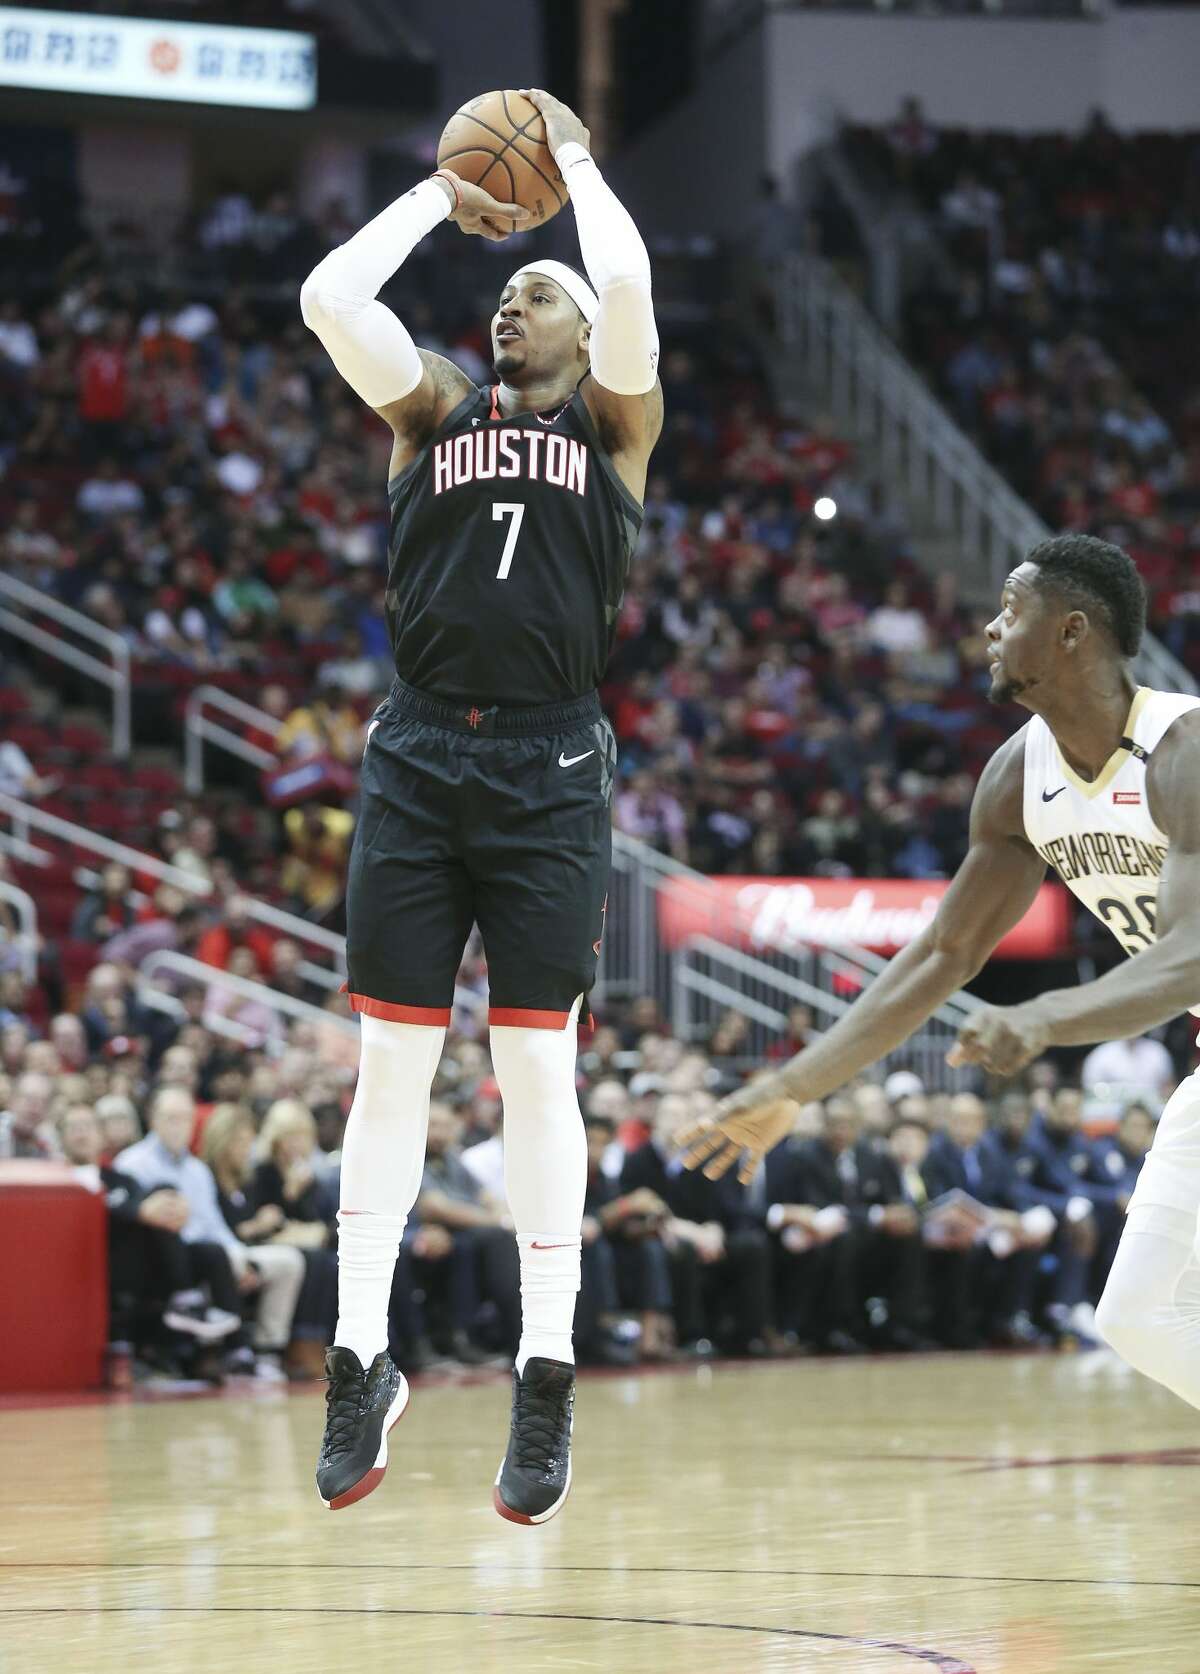 Oct. 17: Pelicans 131, Rockets 112 In his Rockets debut, Anthony scored 9 points on 3-of-10 shooting. In a game where the Rockets got blown out, Anthony had a plus-minus of minus-20.